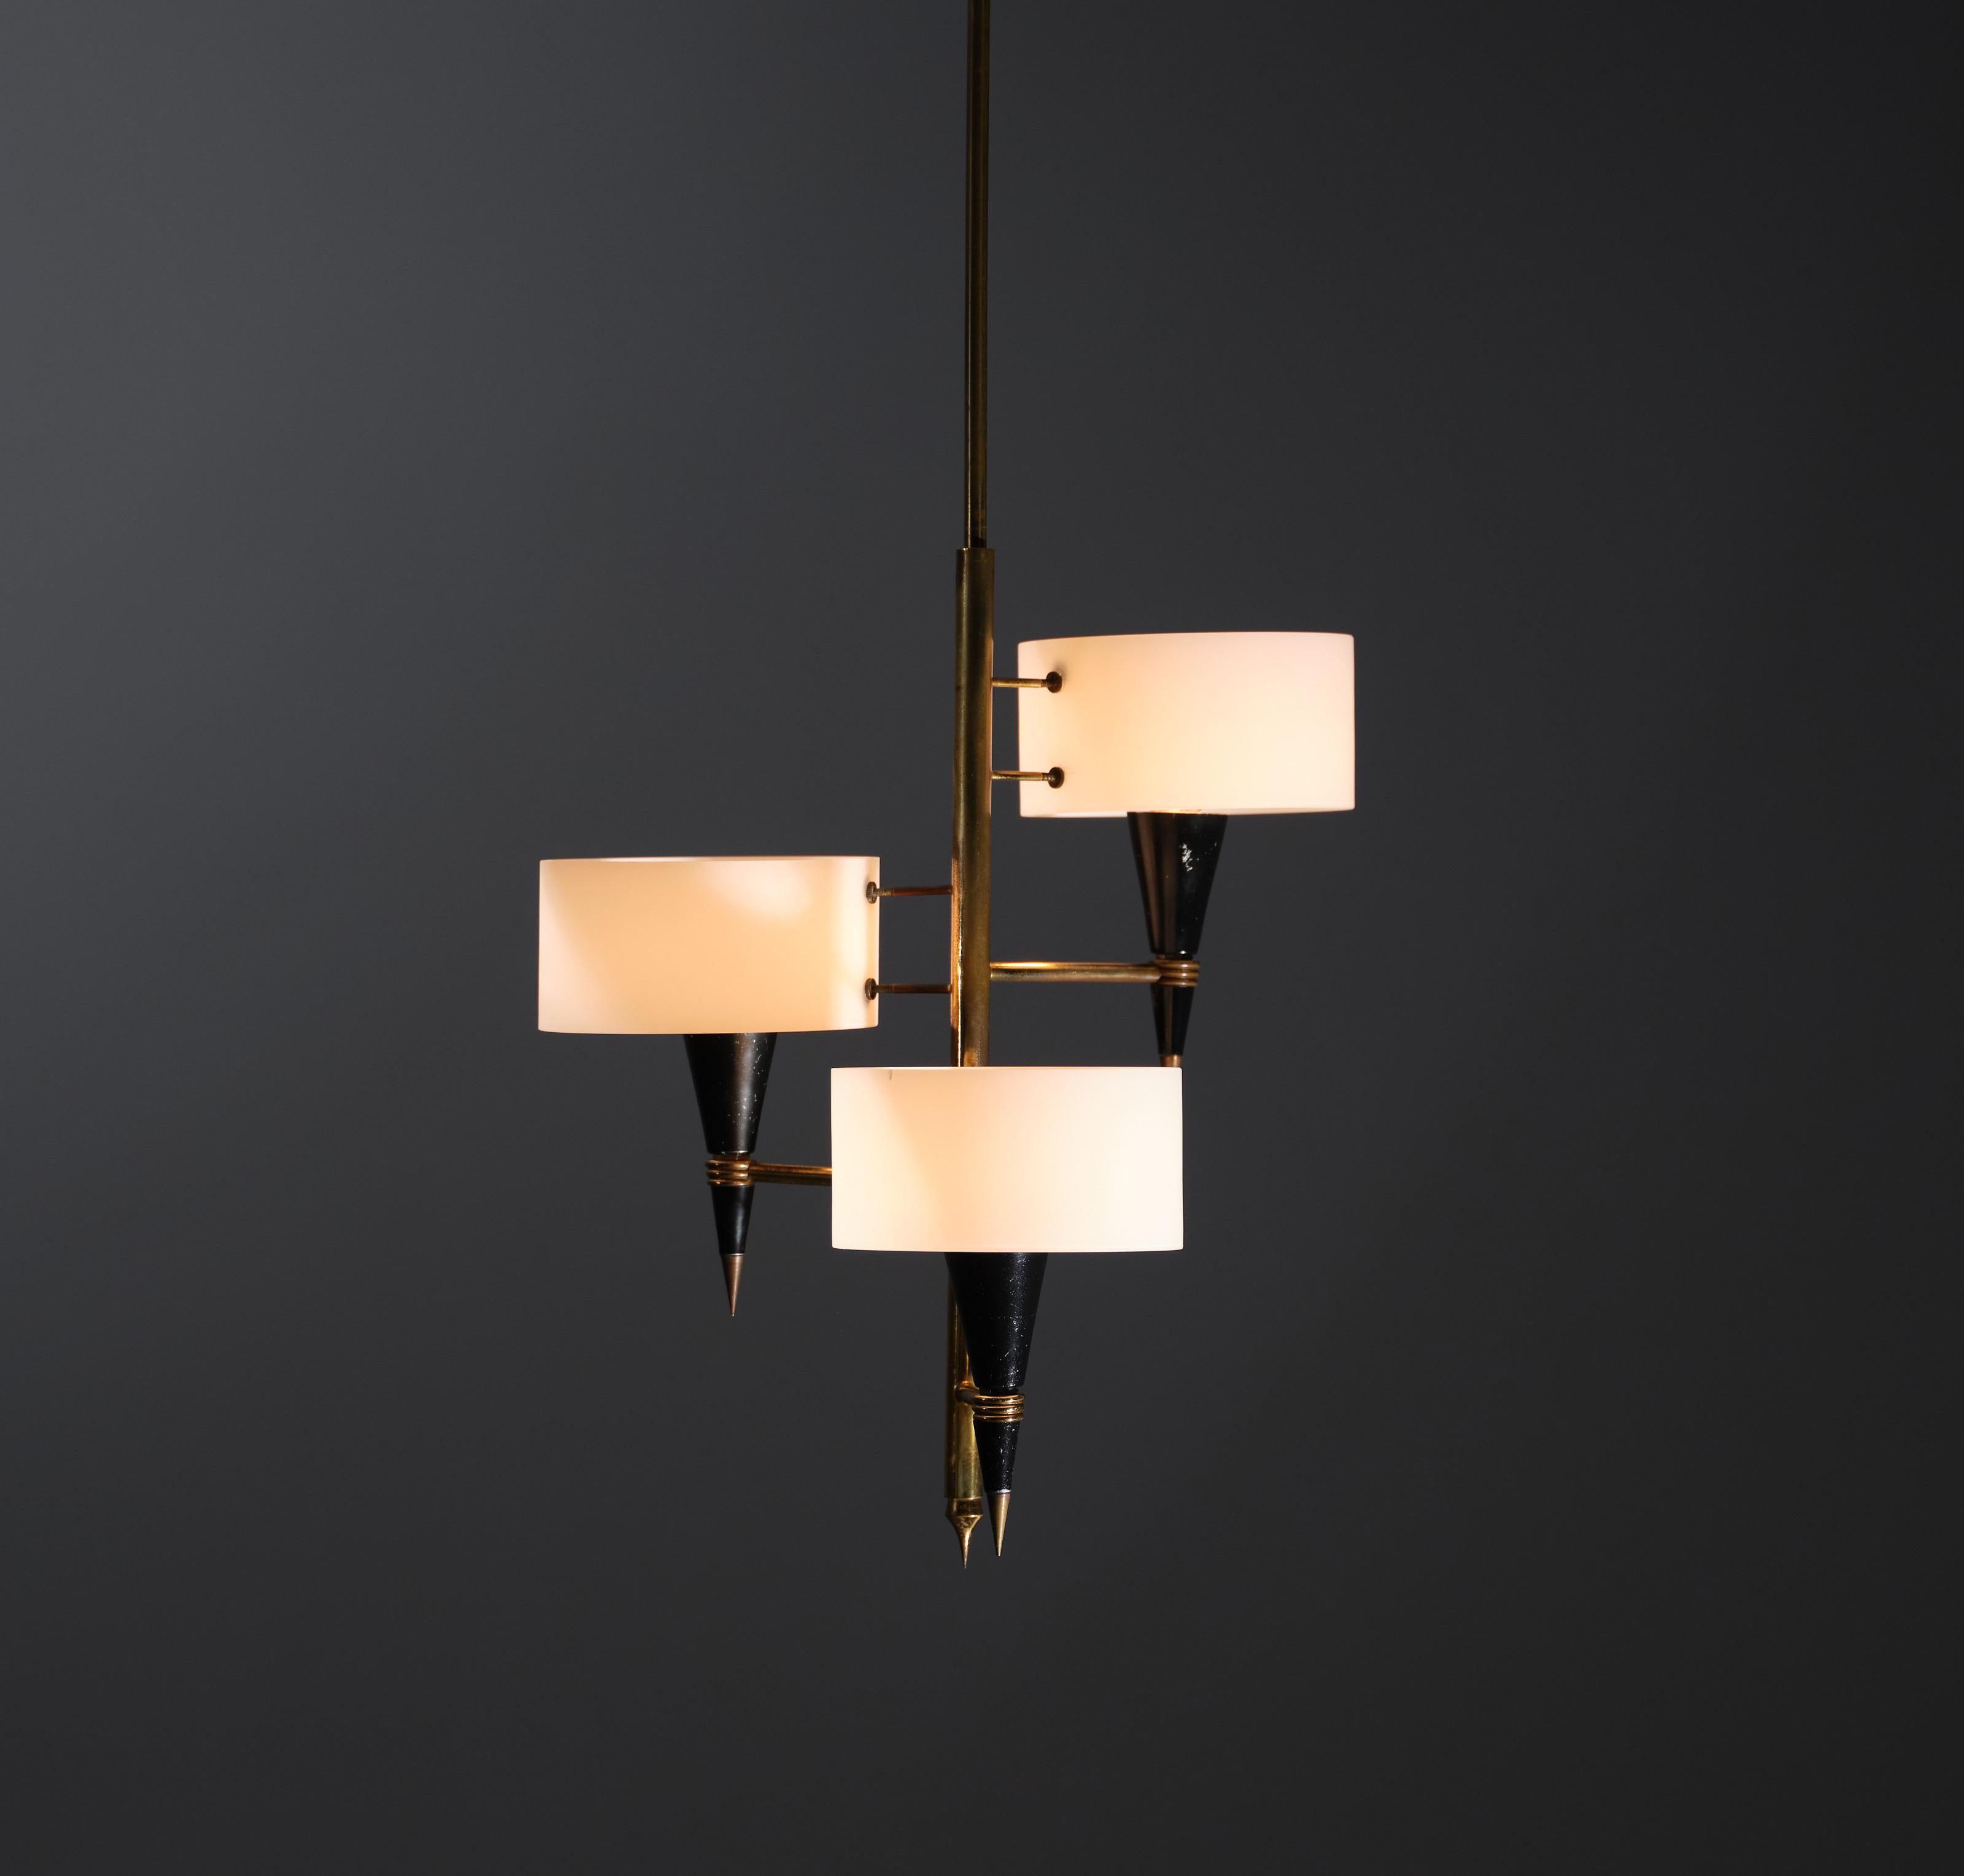 Chandelier , 3 point light , opaline glass , brass , black metal , Italy , 1950s 

An Italian design pendant lamp from the 1950s.
Three light points with opal glass shade. Many brass parts with a beautiful original patina and metal parts with